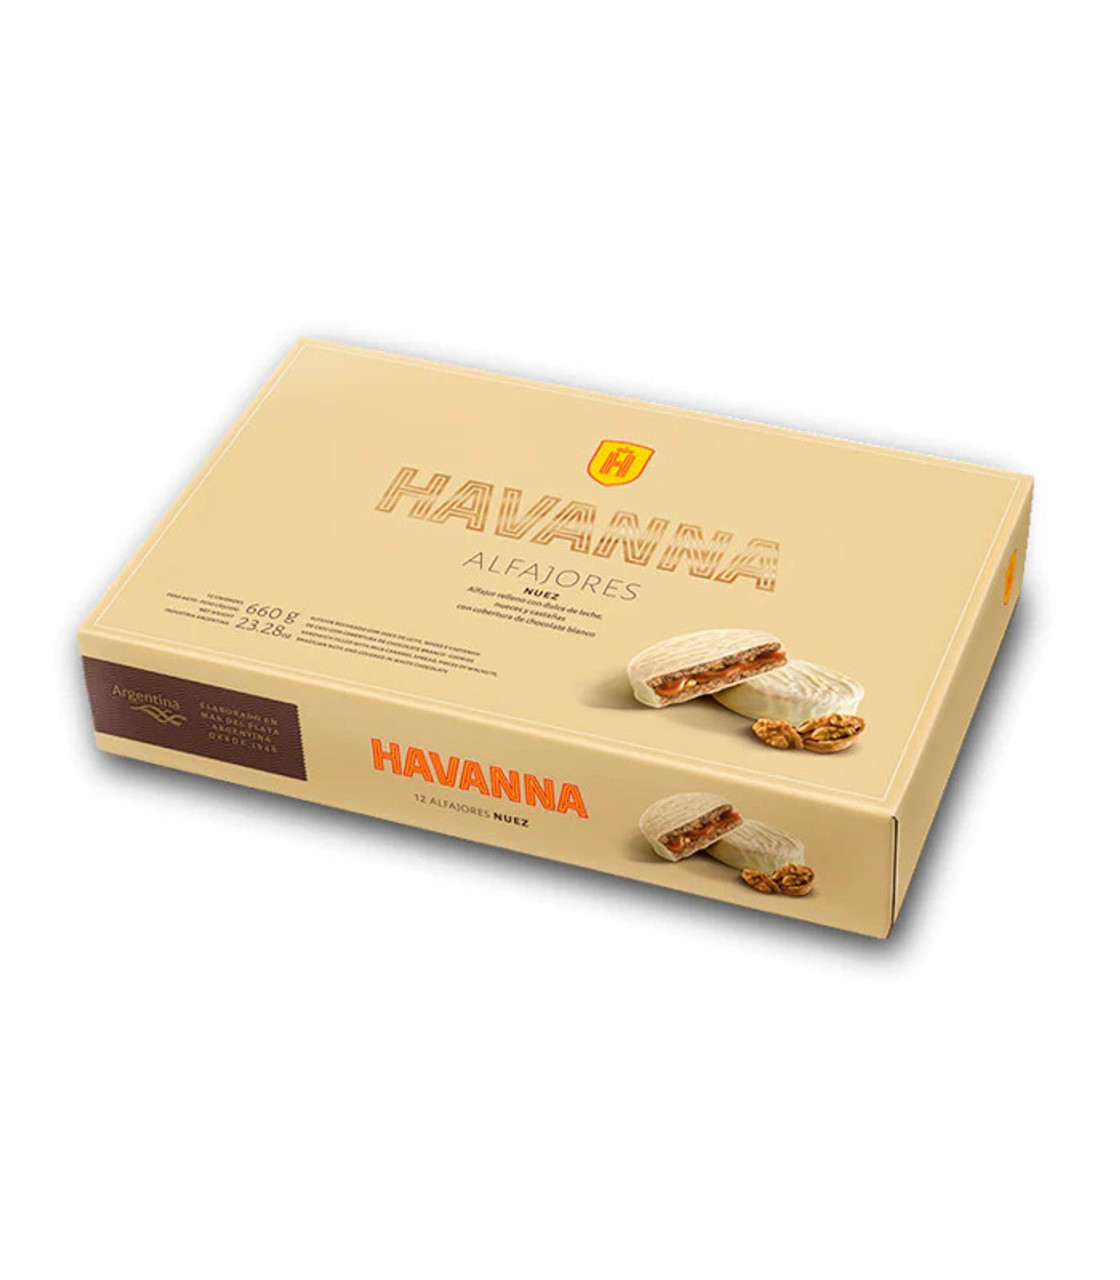 Havanna Alfajor White Chocolate with Nuts and Dulce de Leche (box of 12)